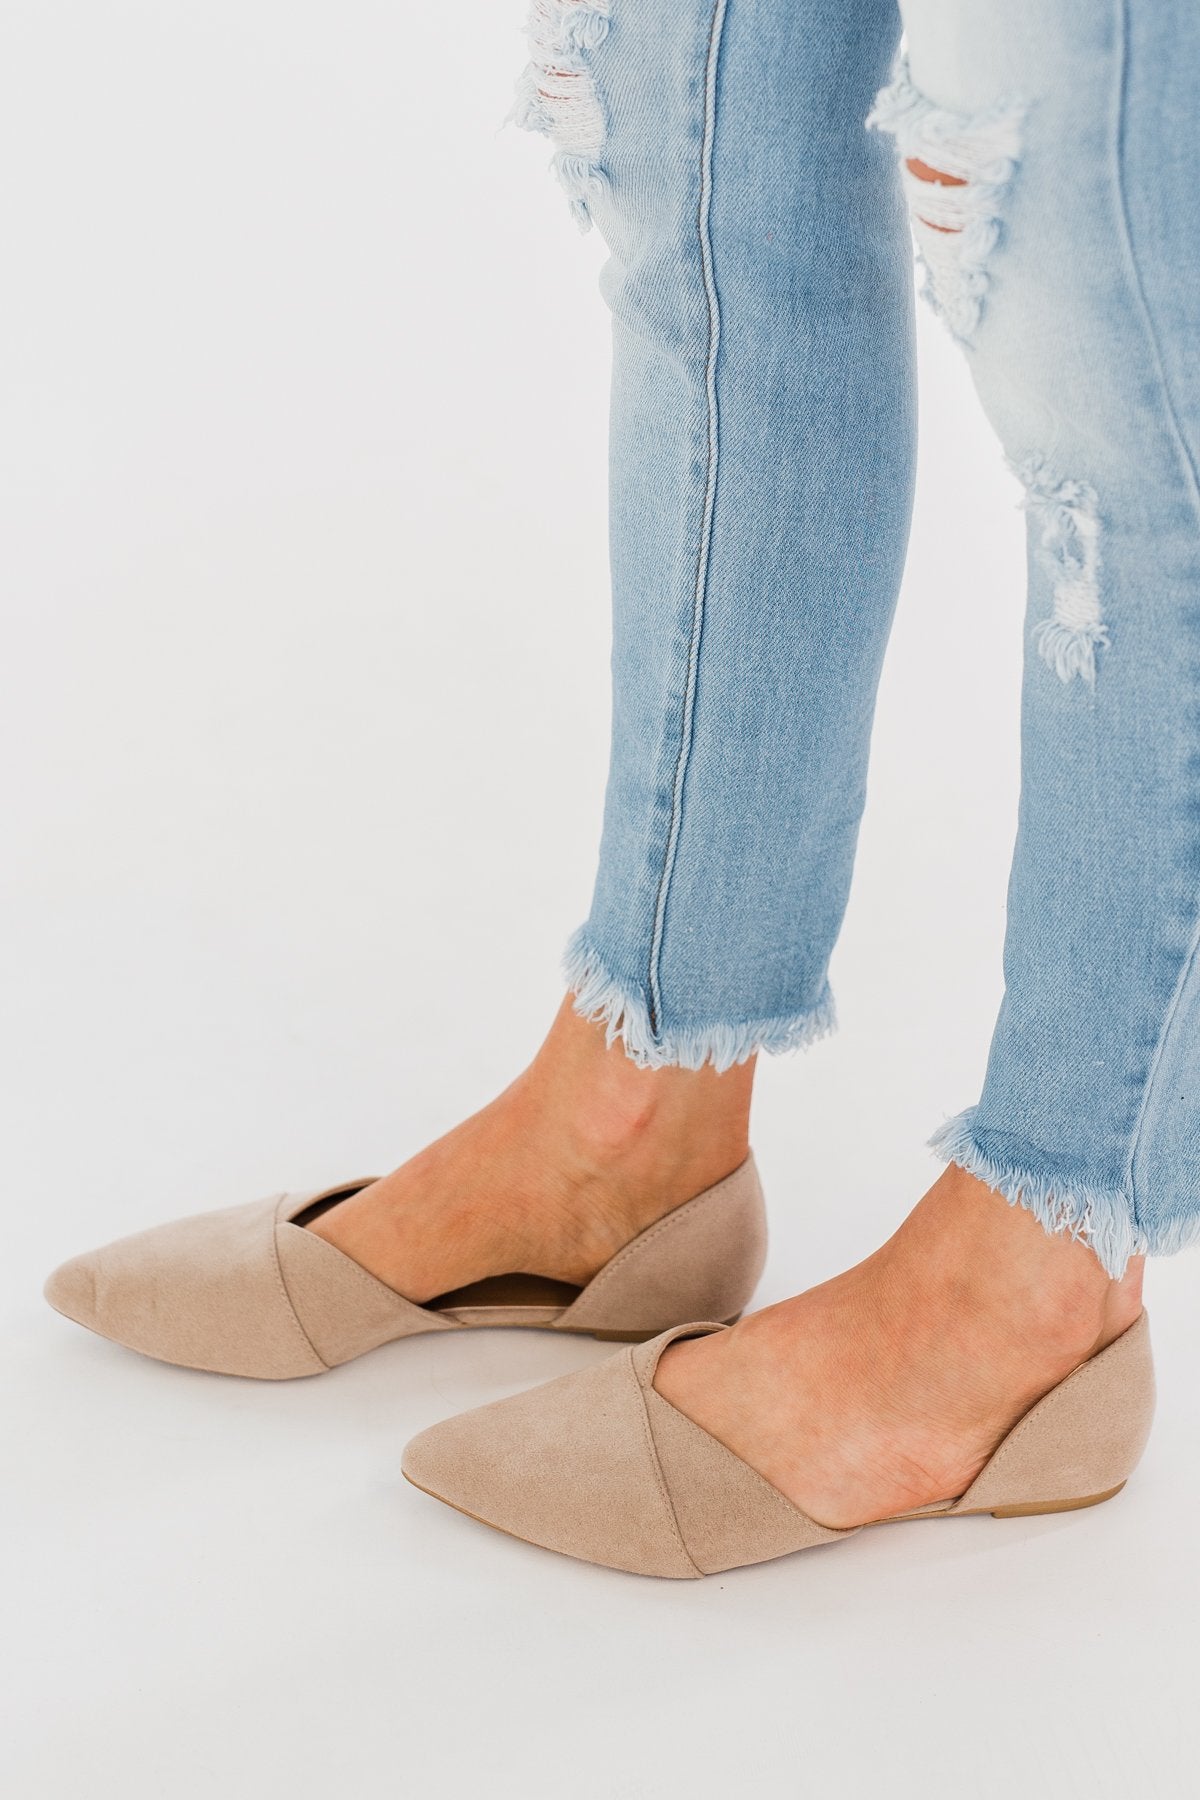 Qupid Zoom Flats- Taupe Suede